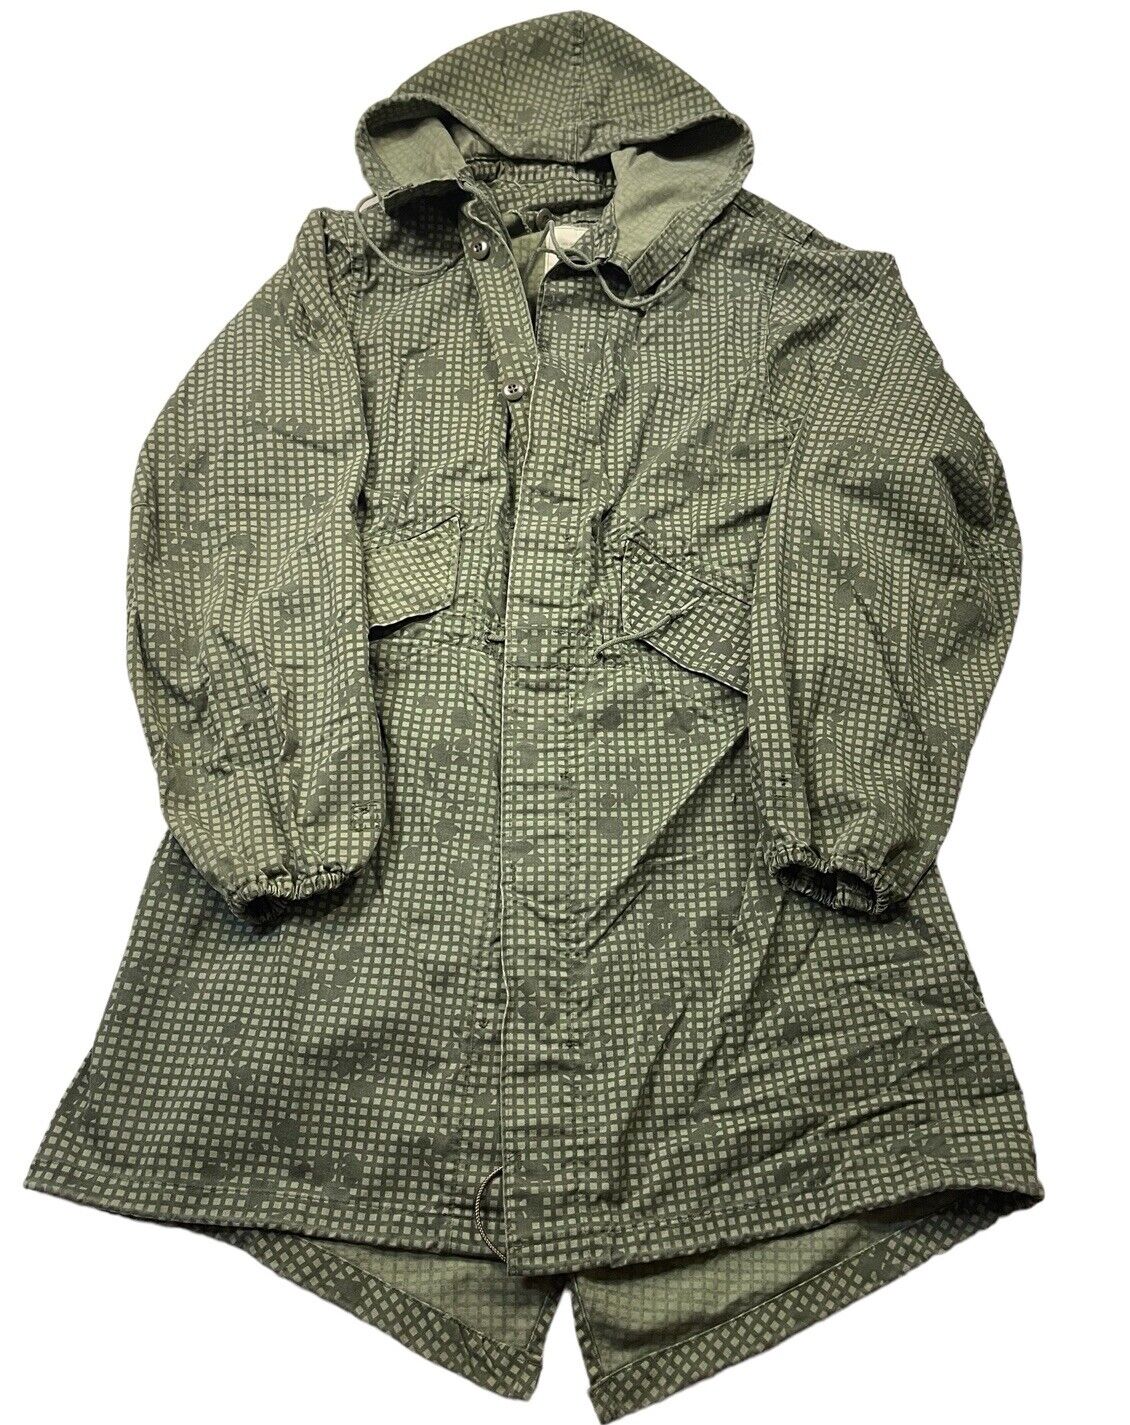 Night Camouflage Desert Parka - Small 8415-01-102-6279 - Used ( Flaws Check Pic)